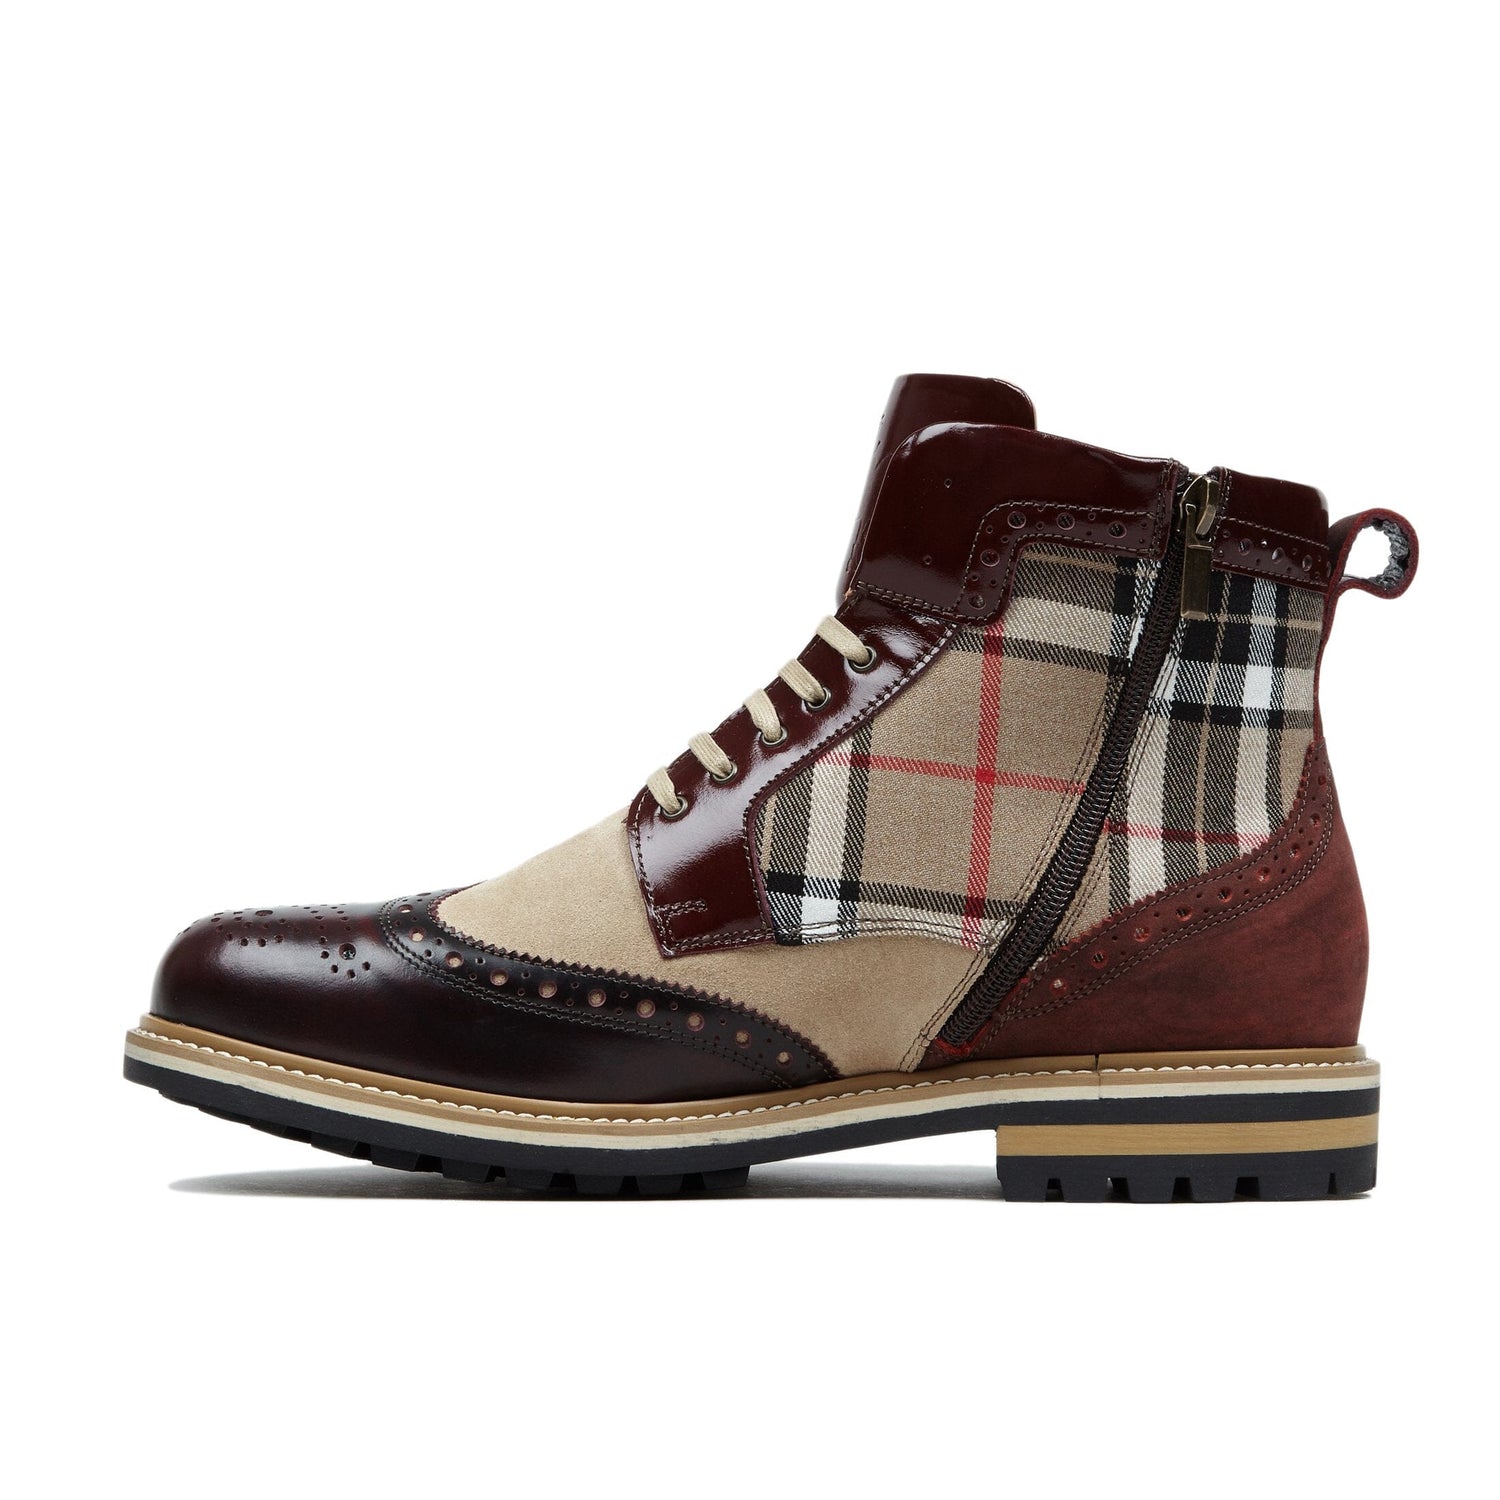 Wanderer - Multi Check Ankle Boots Embassy London 